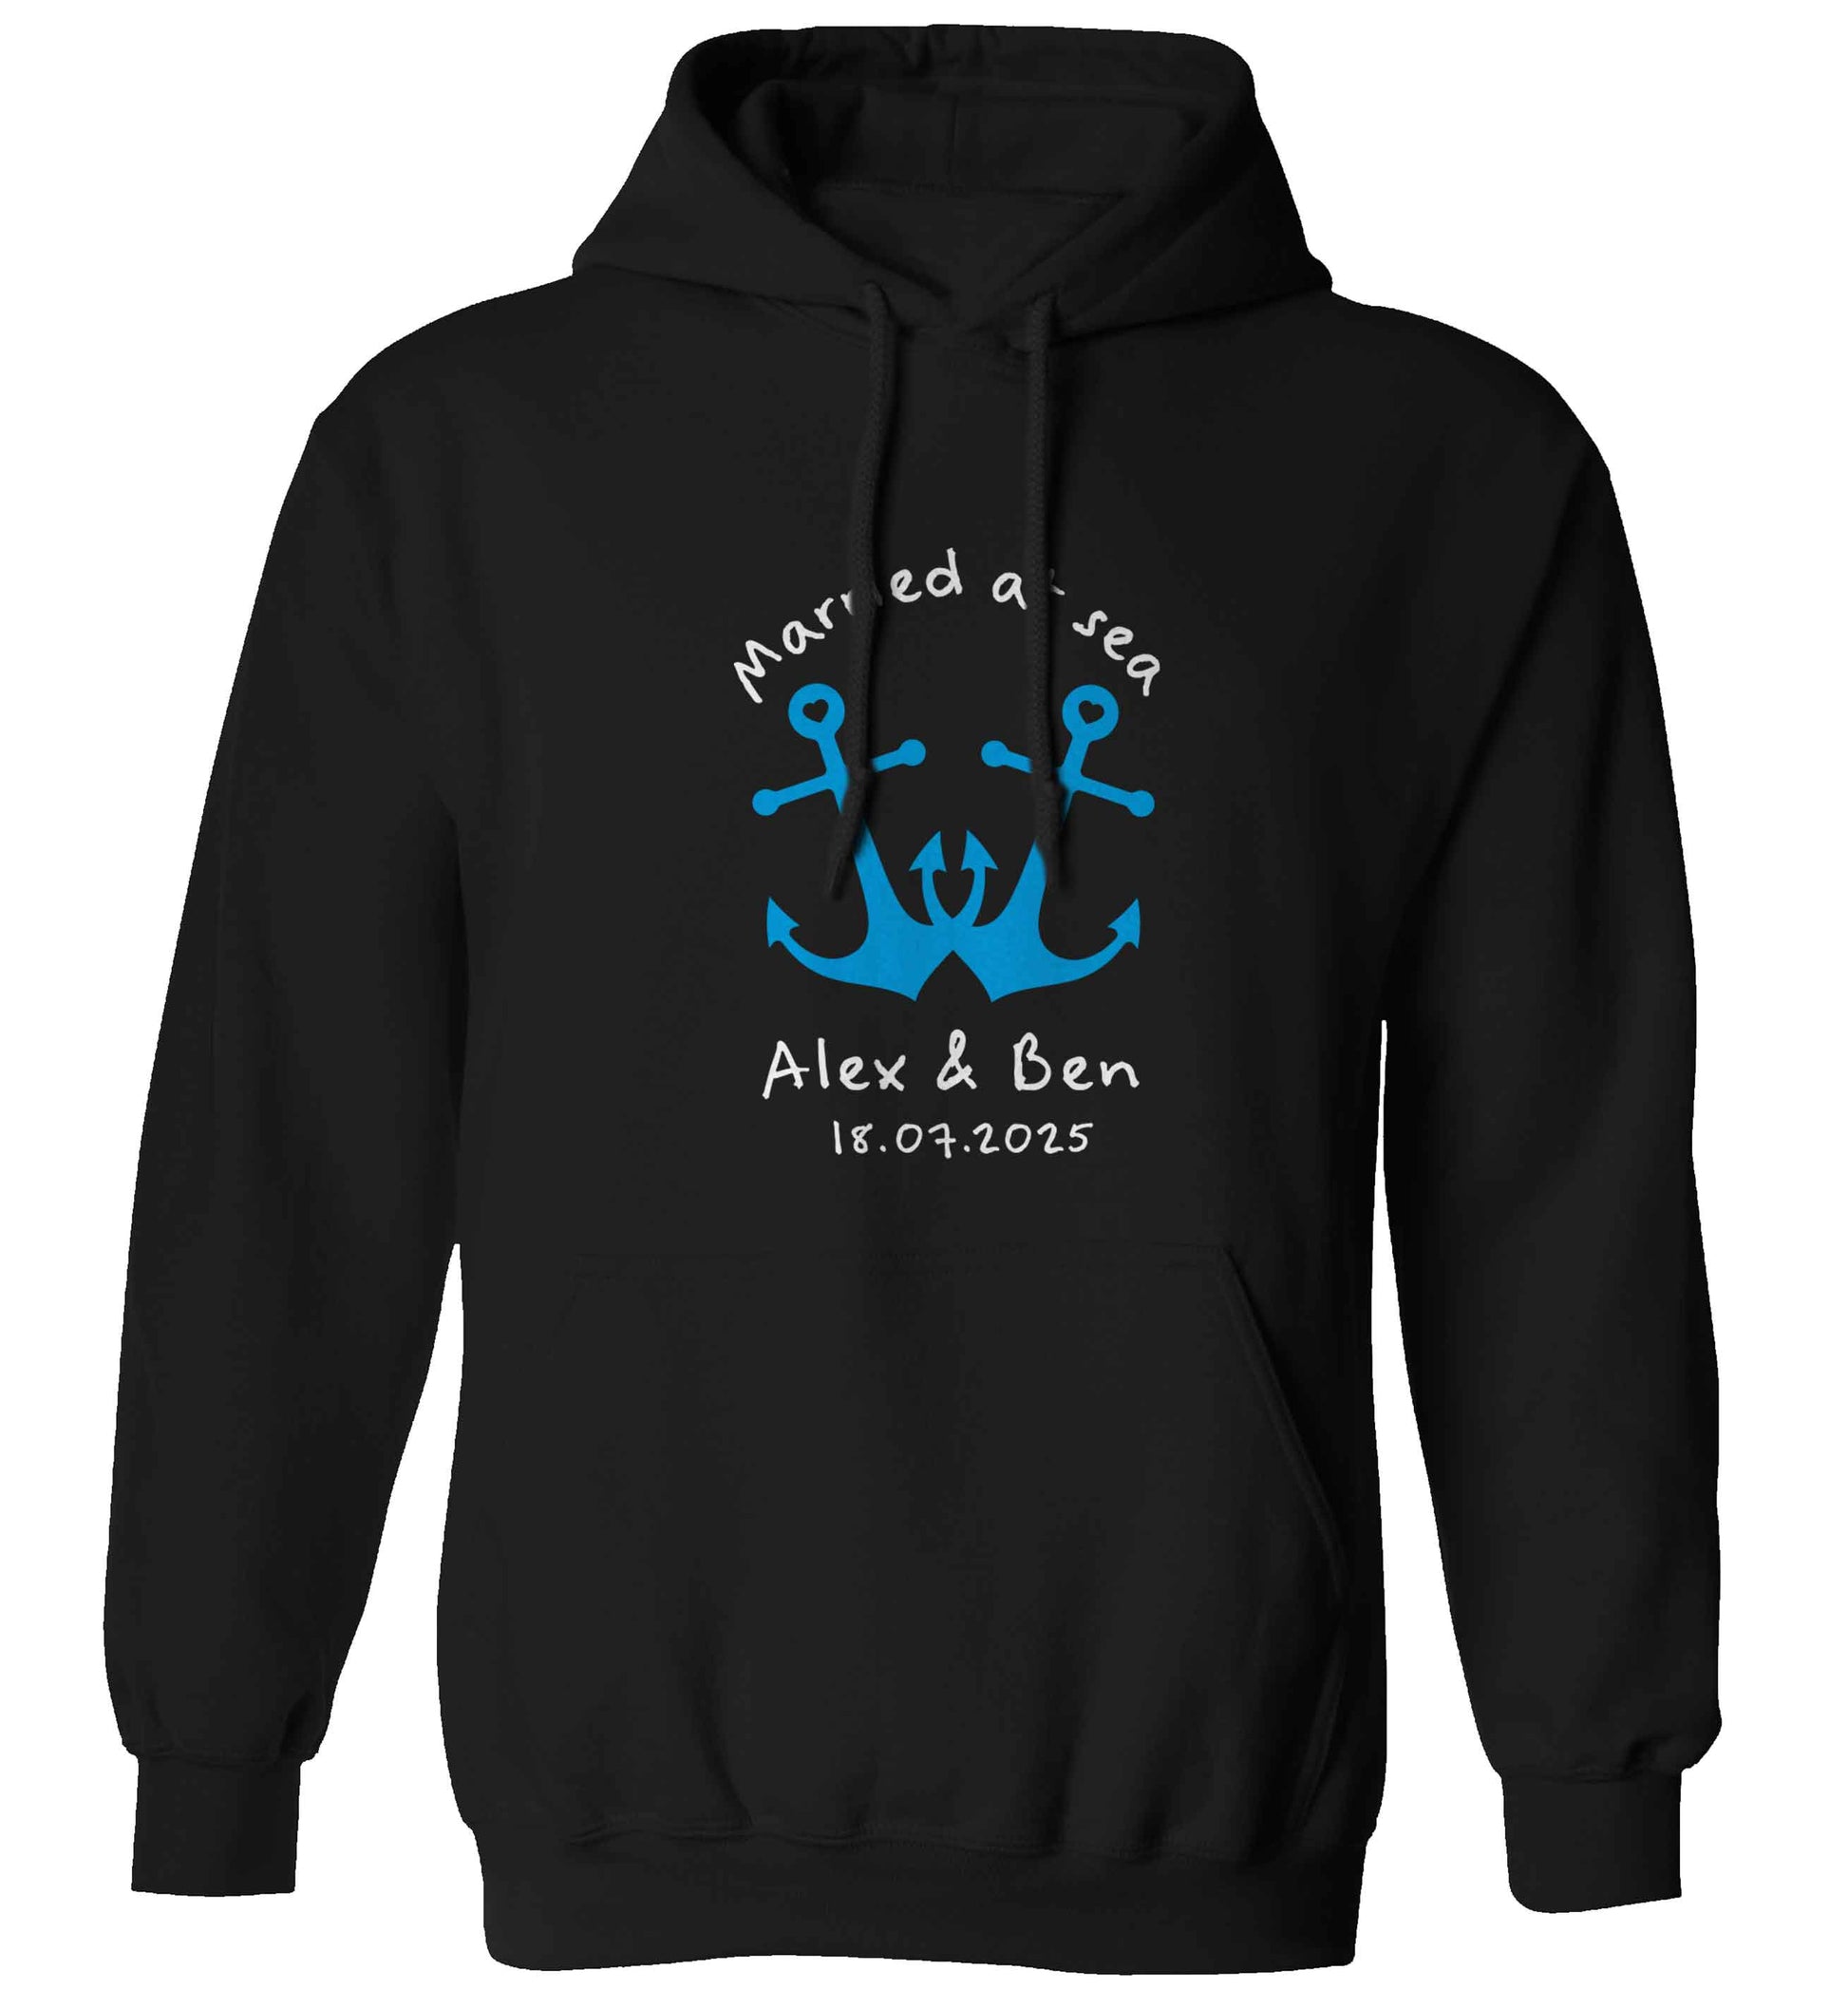 Married at sea blue anchors adults unisex black hoodie 2XL